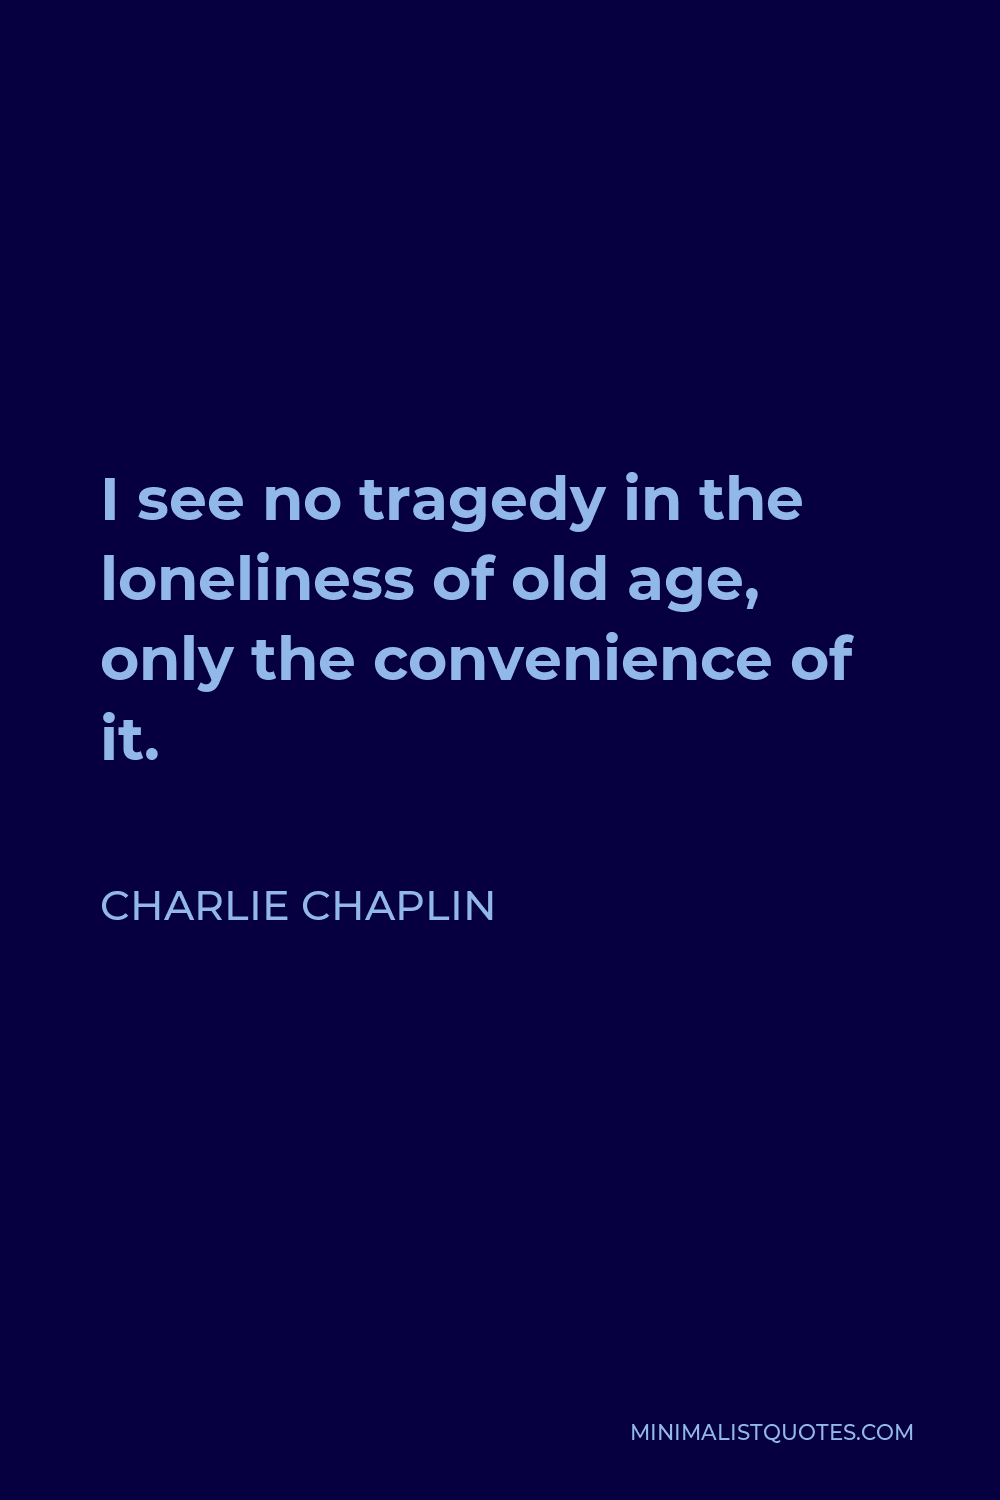 Charlie Chaplin Quote - I see no tragedy in the loneliness of old age, only the convenience of it.